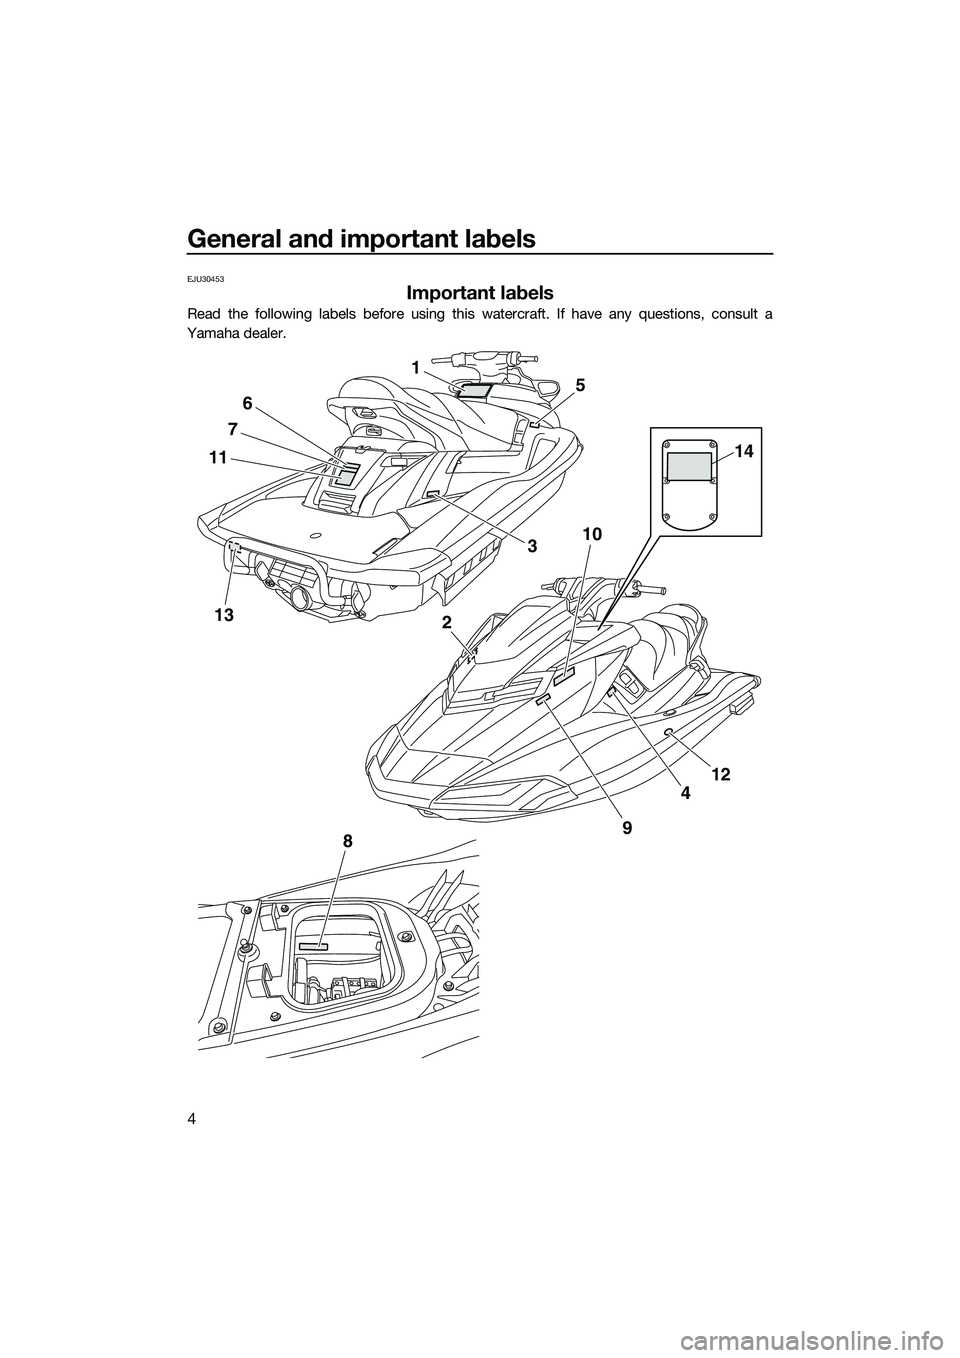 YAMAHA FX HO 2015  Owners Manual General and important labels
4
EJU30453
Important labels
Read the following labels before using this watercraft. If have any questions, consult a
Yamaha dealer.
13
1
11
7
6
10
2
8
4
12
9
5
3
14
UF2T74